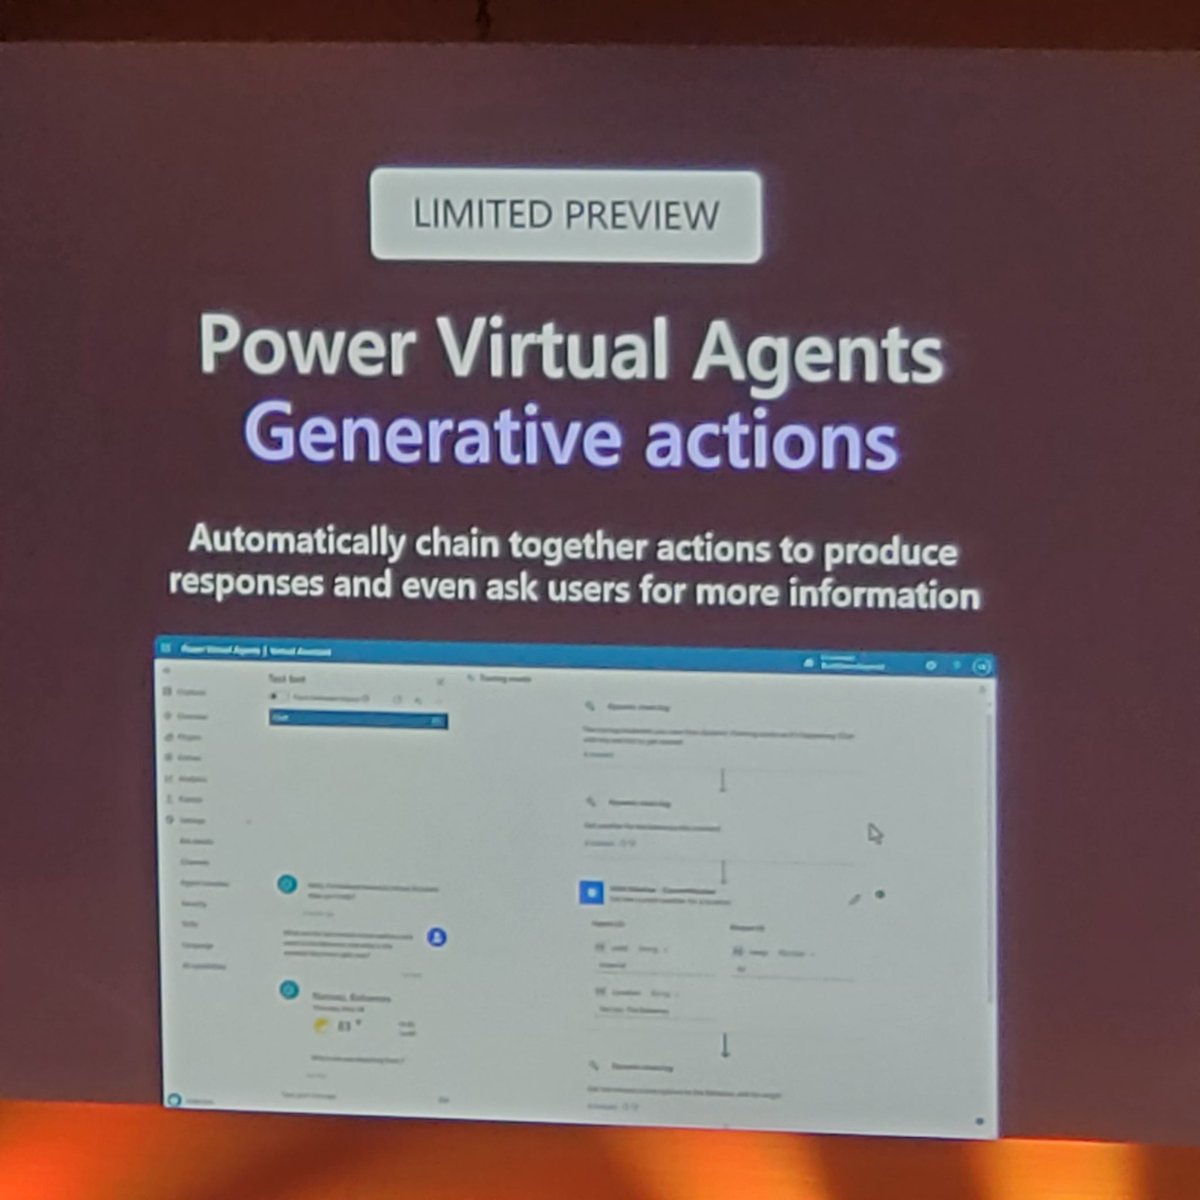 The impact #AI has had on #PowerVirtualAgents is incredible. The #1 challenge is content, but with #GenerativeAnswers you can upload documents and accelerate this greatly. What about when content isn't enough? #GenerativeActions greatly helps close the gap #PowerPlatform #EPPC23